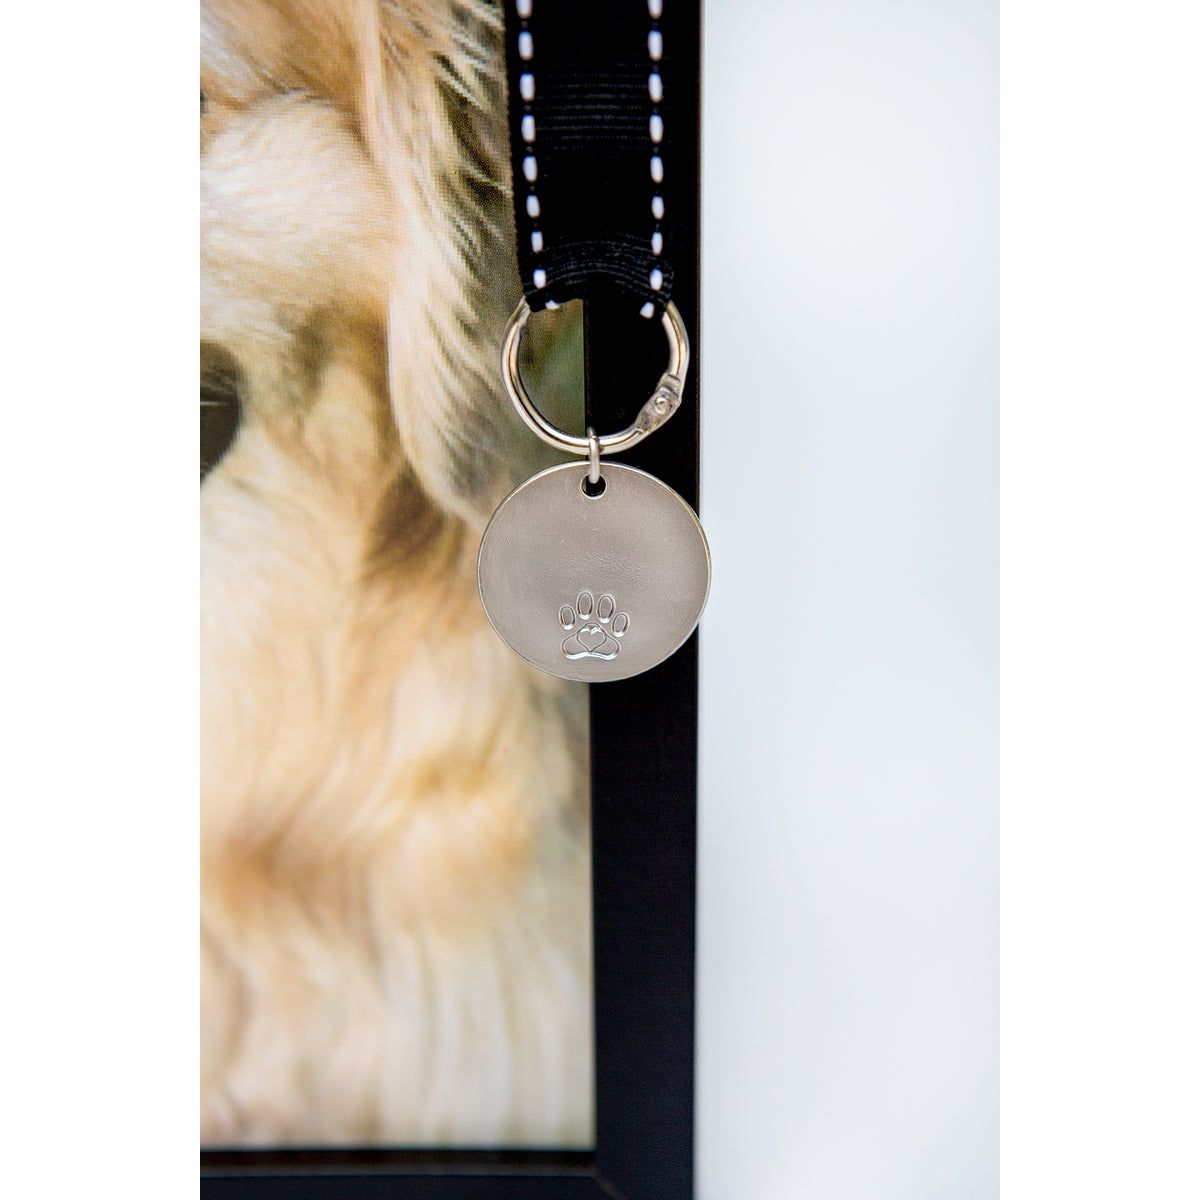 Detailed view of tag embossed with paw print.